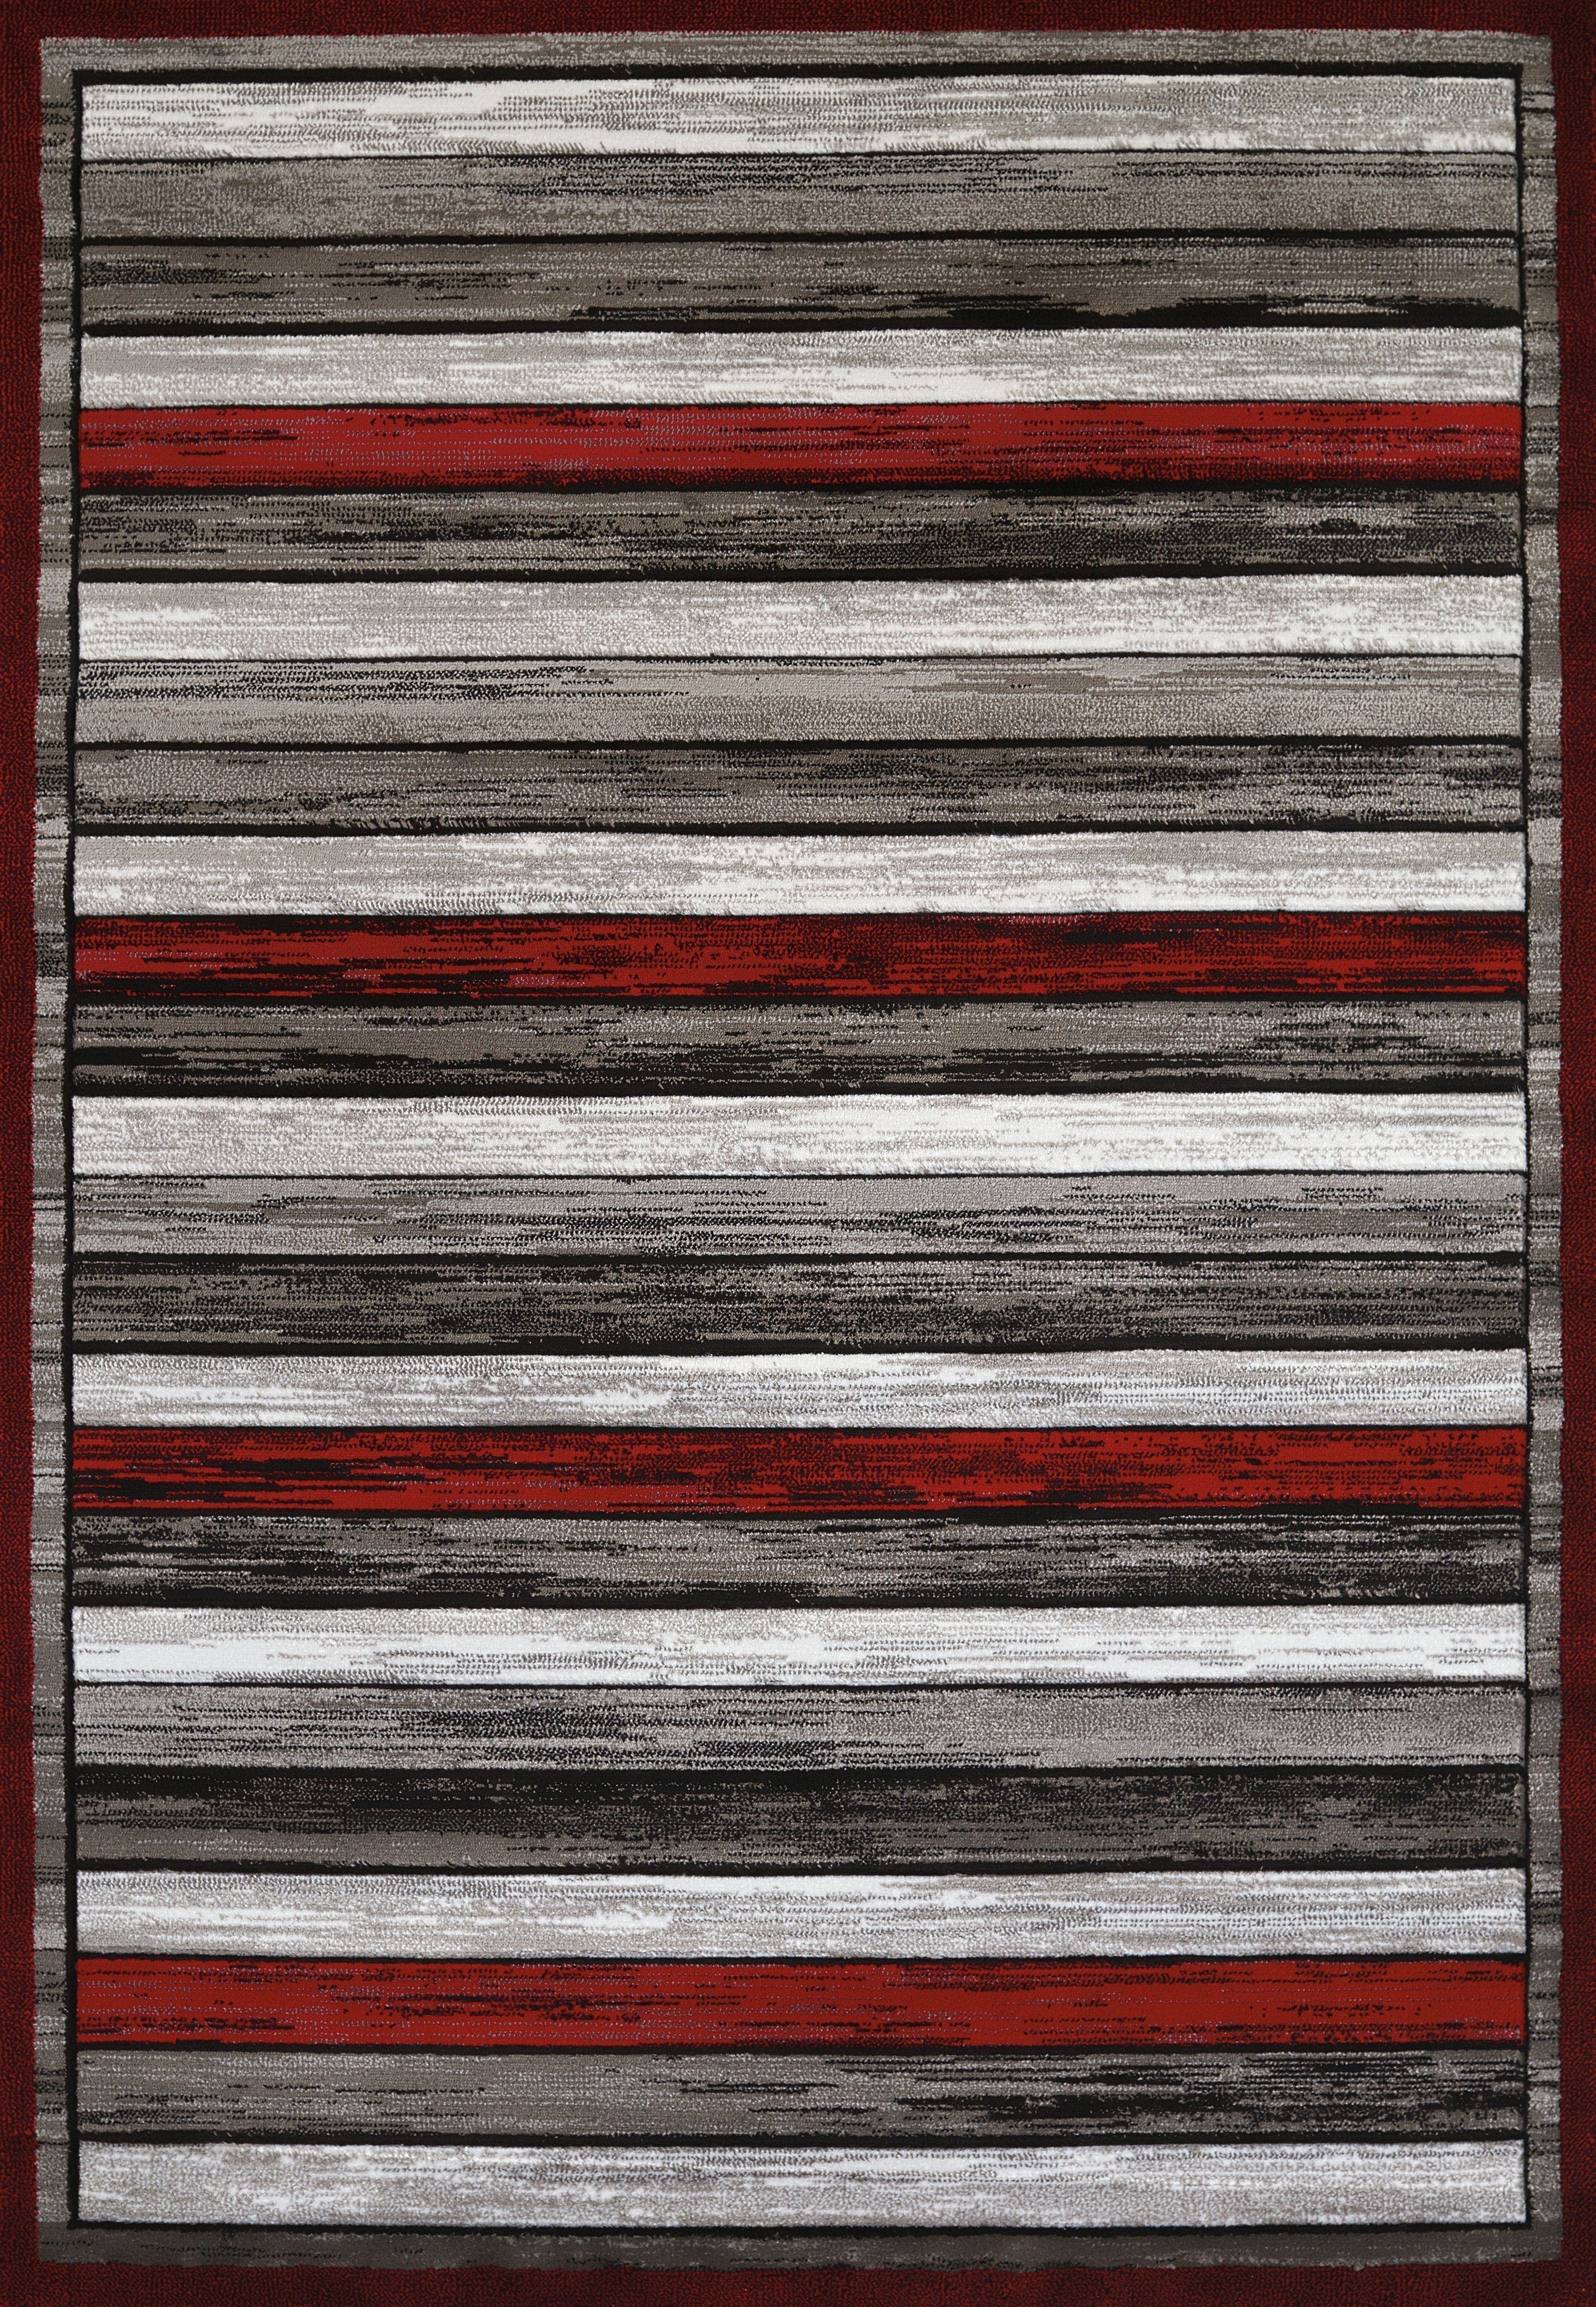 Studio Painted Deck Scarlet Accent Rug (4 Sizes) Rugs United Weavers 1'10" x 3' Mat 